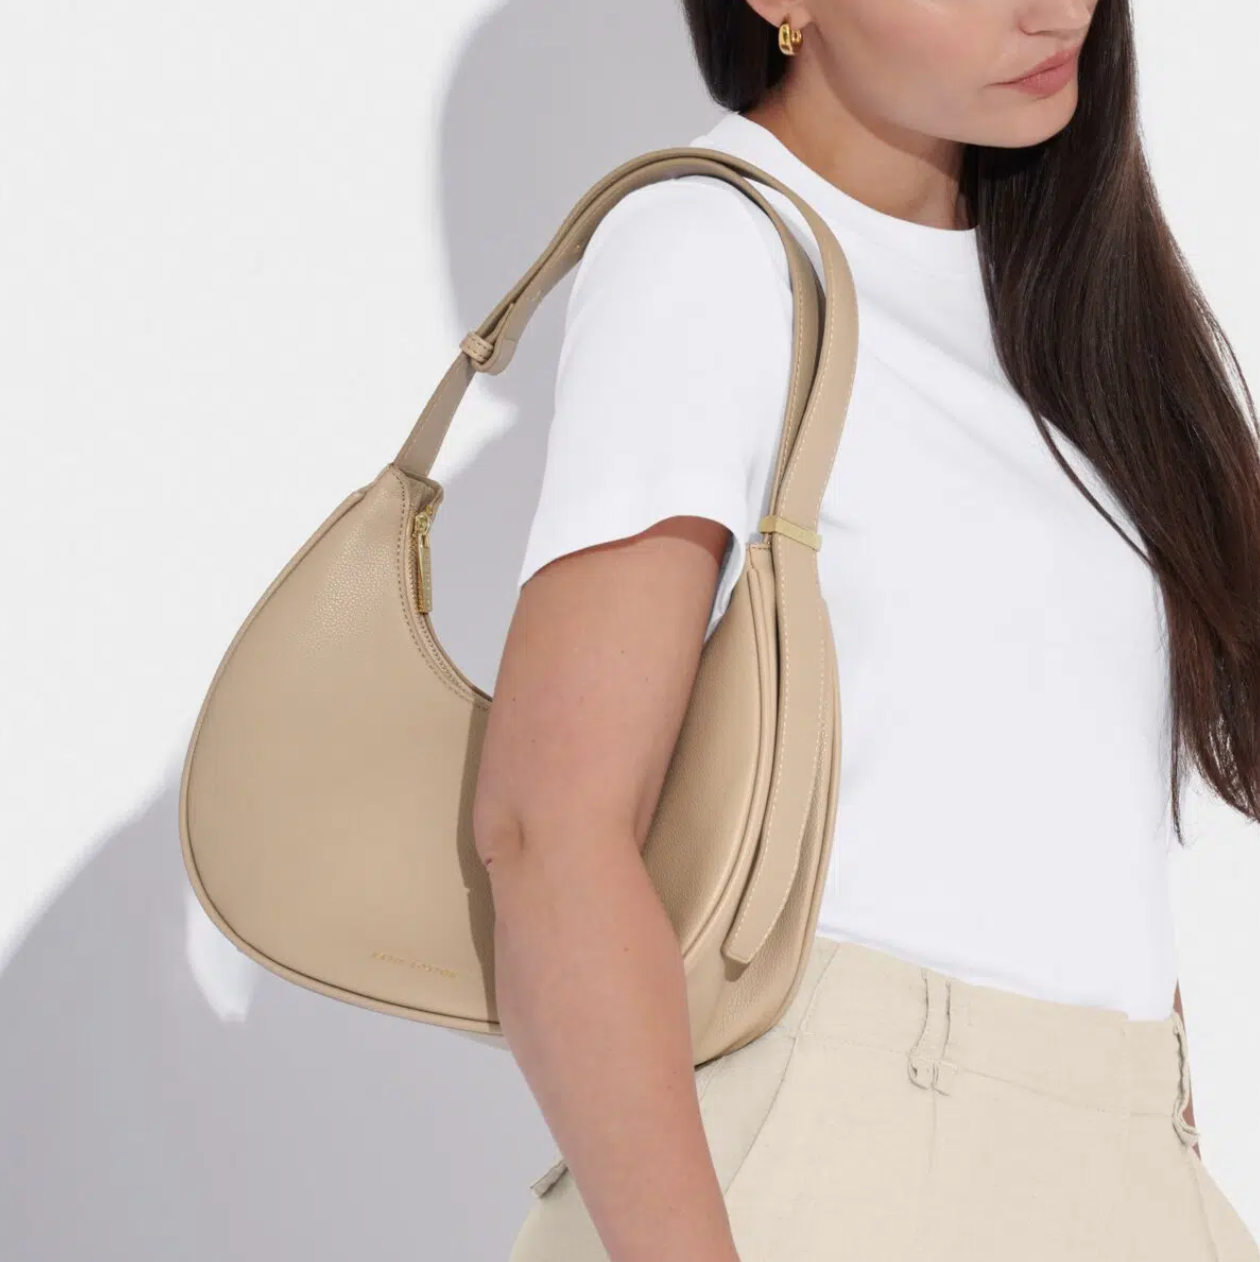 model with long brown hair wearing a white t-shirt and taupe trousers with the light taupe scoop style handbag on her right shoulder.